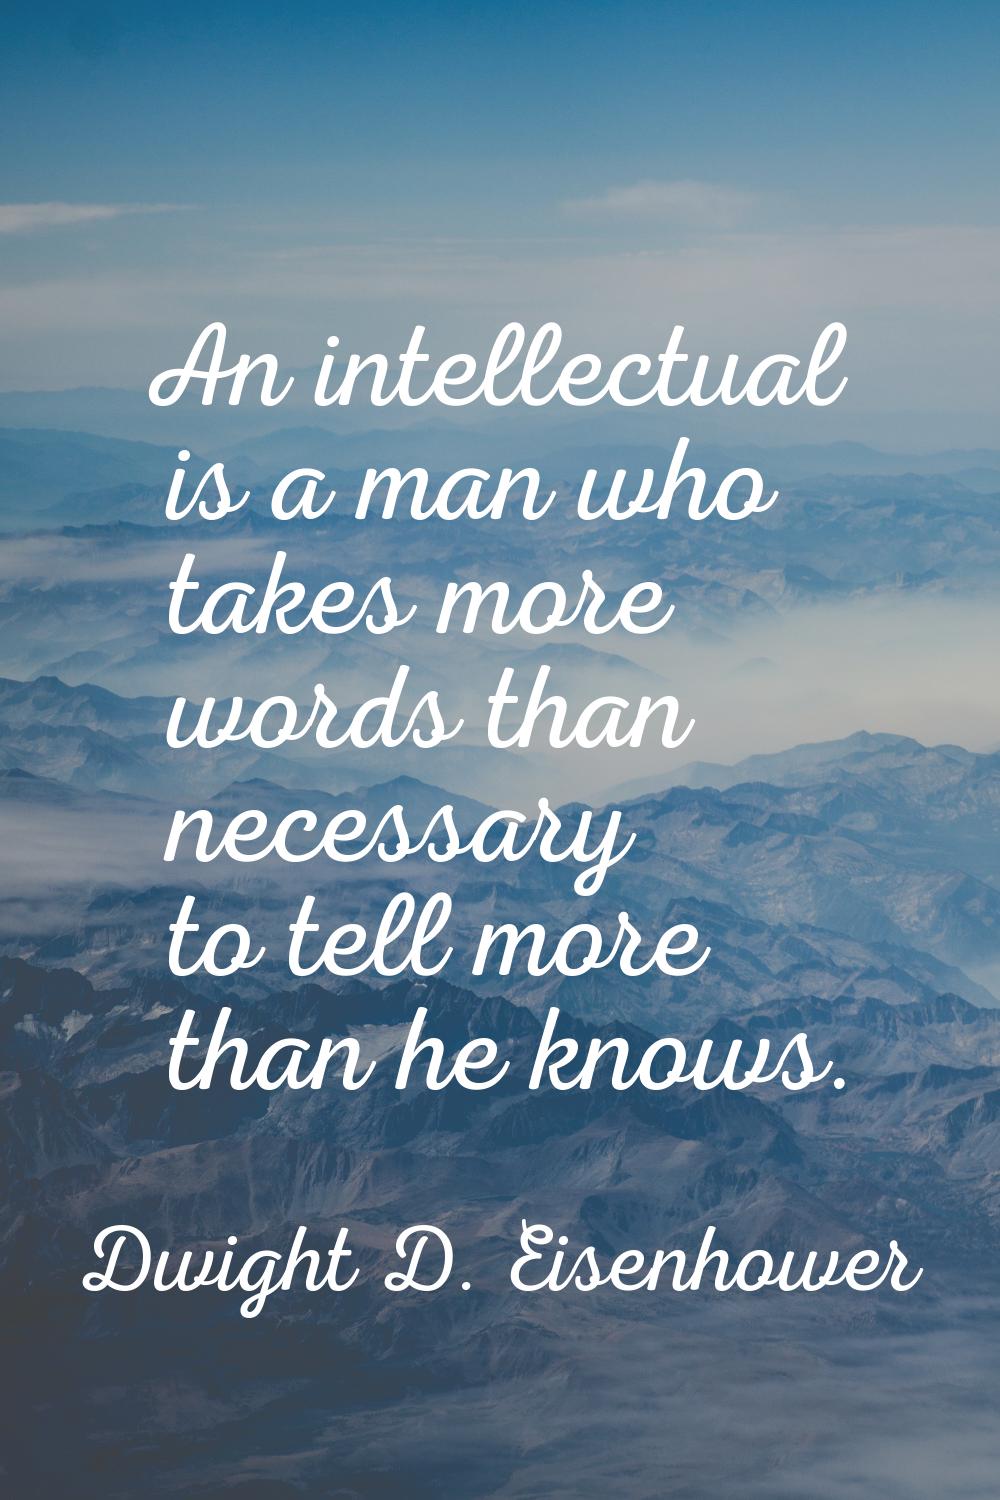 An intellectual is a man who takes more words than necessary to tell more than he knows.